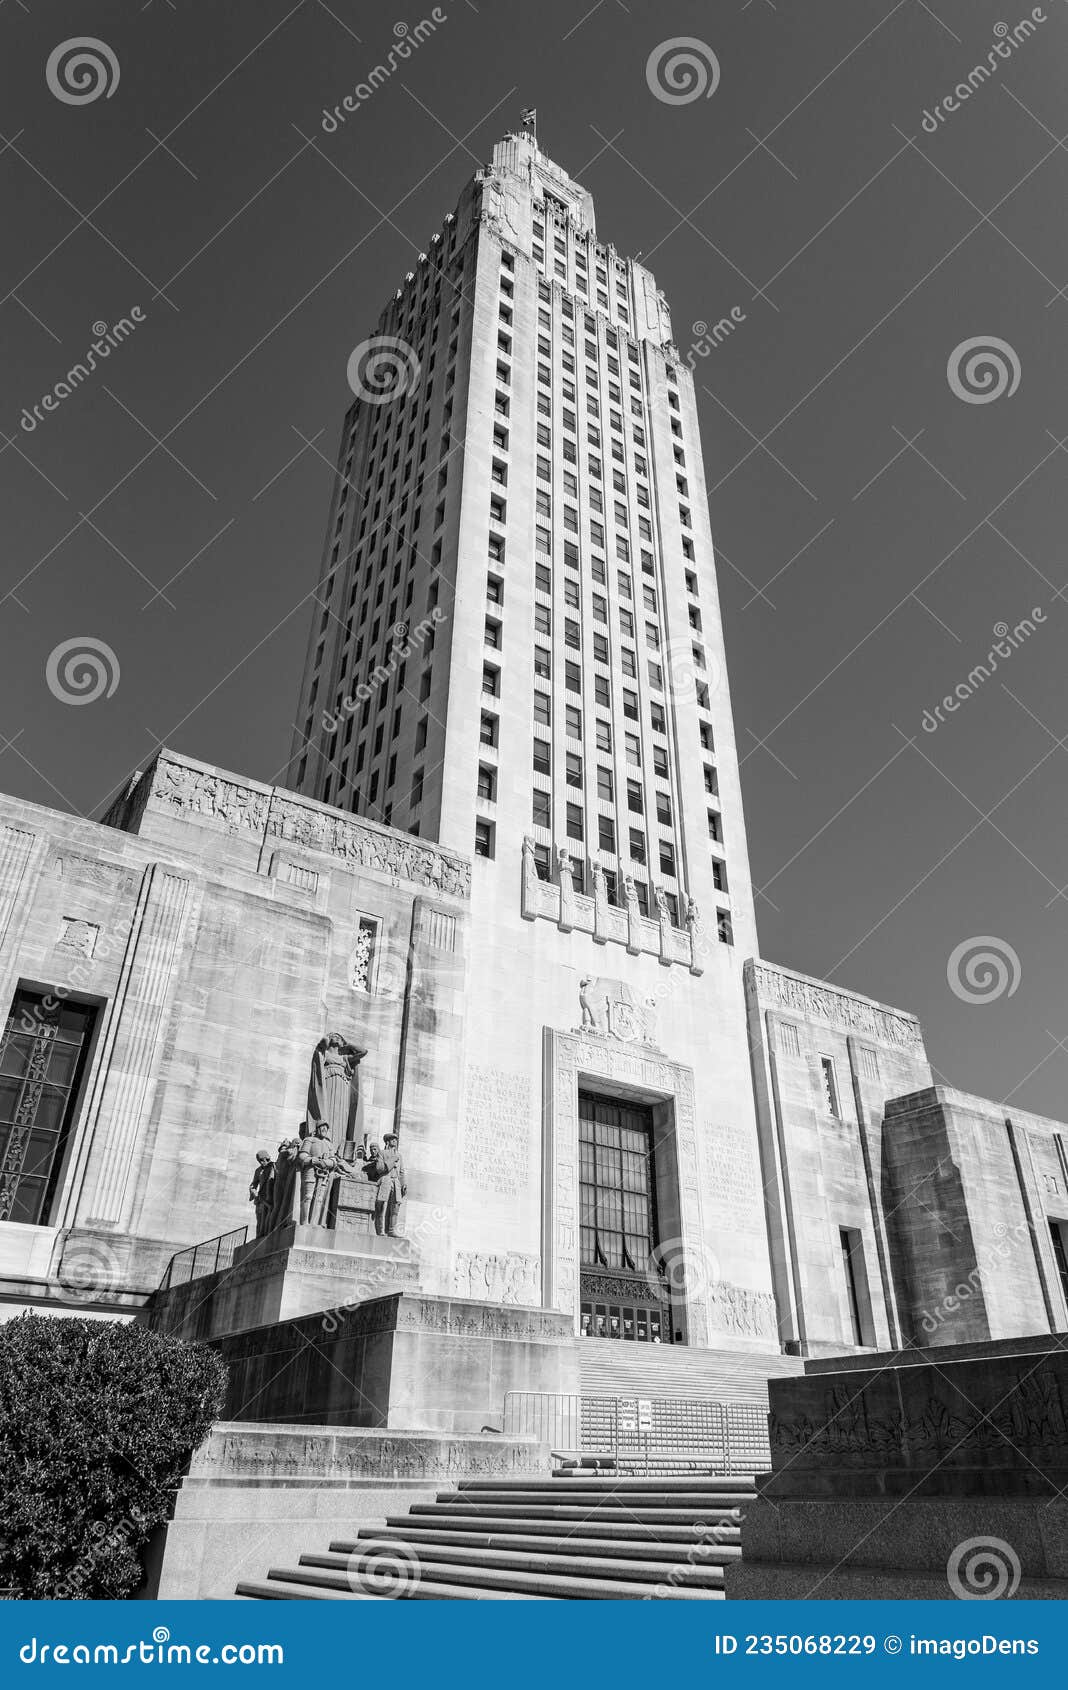 the louisiana state capitol in baton rouge